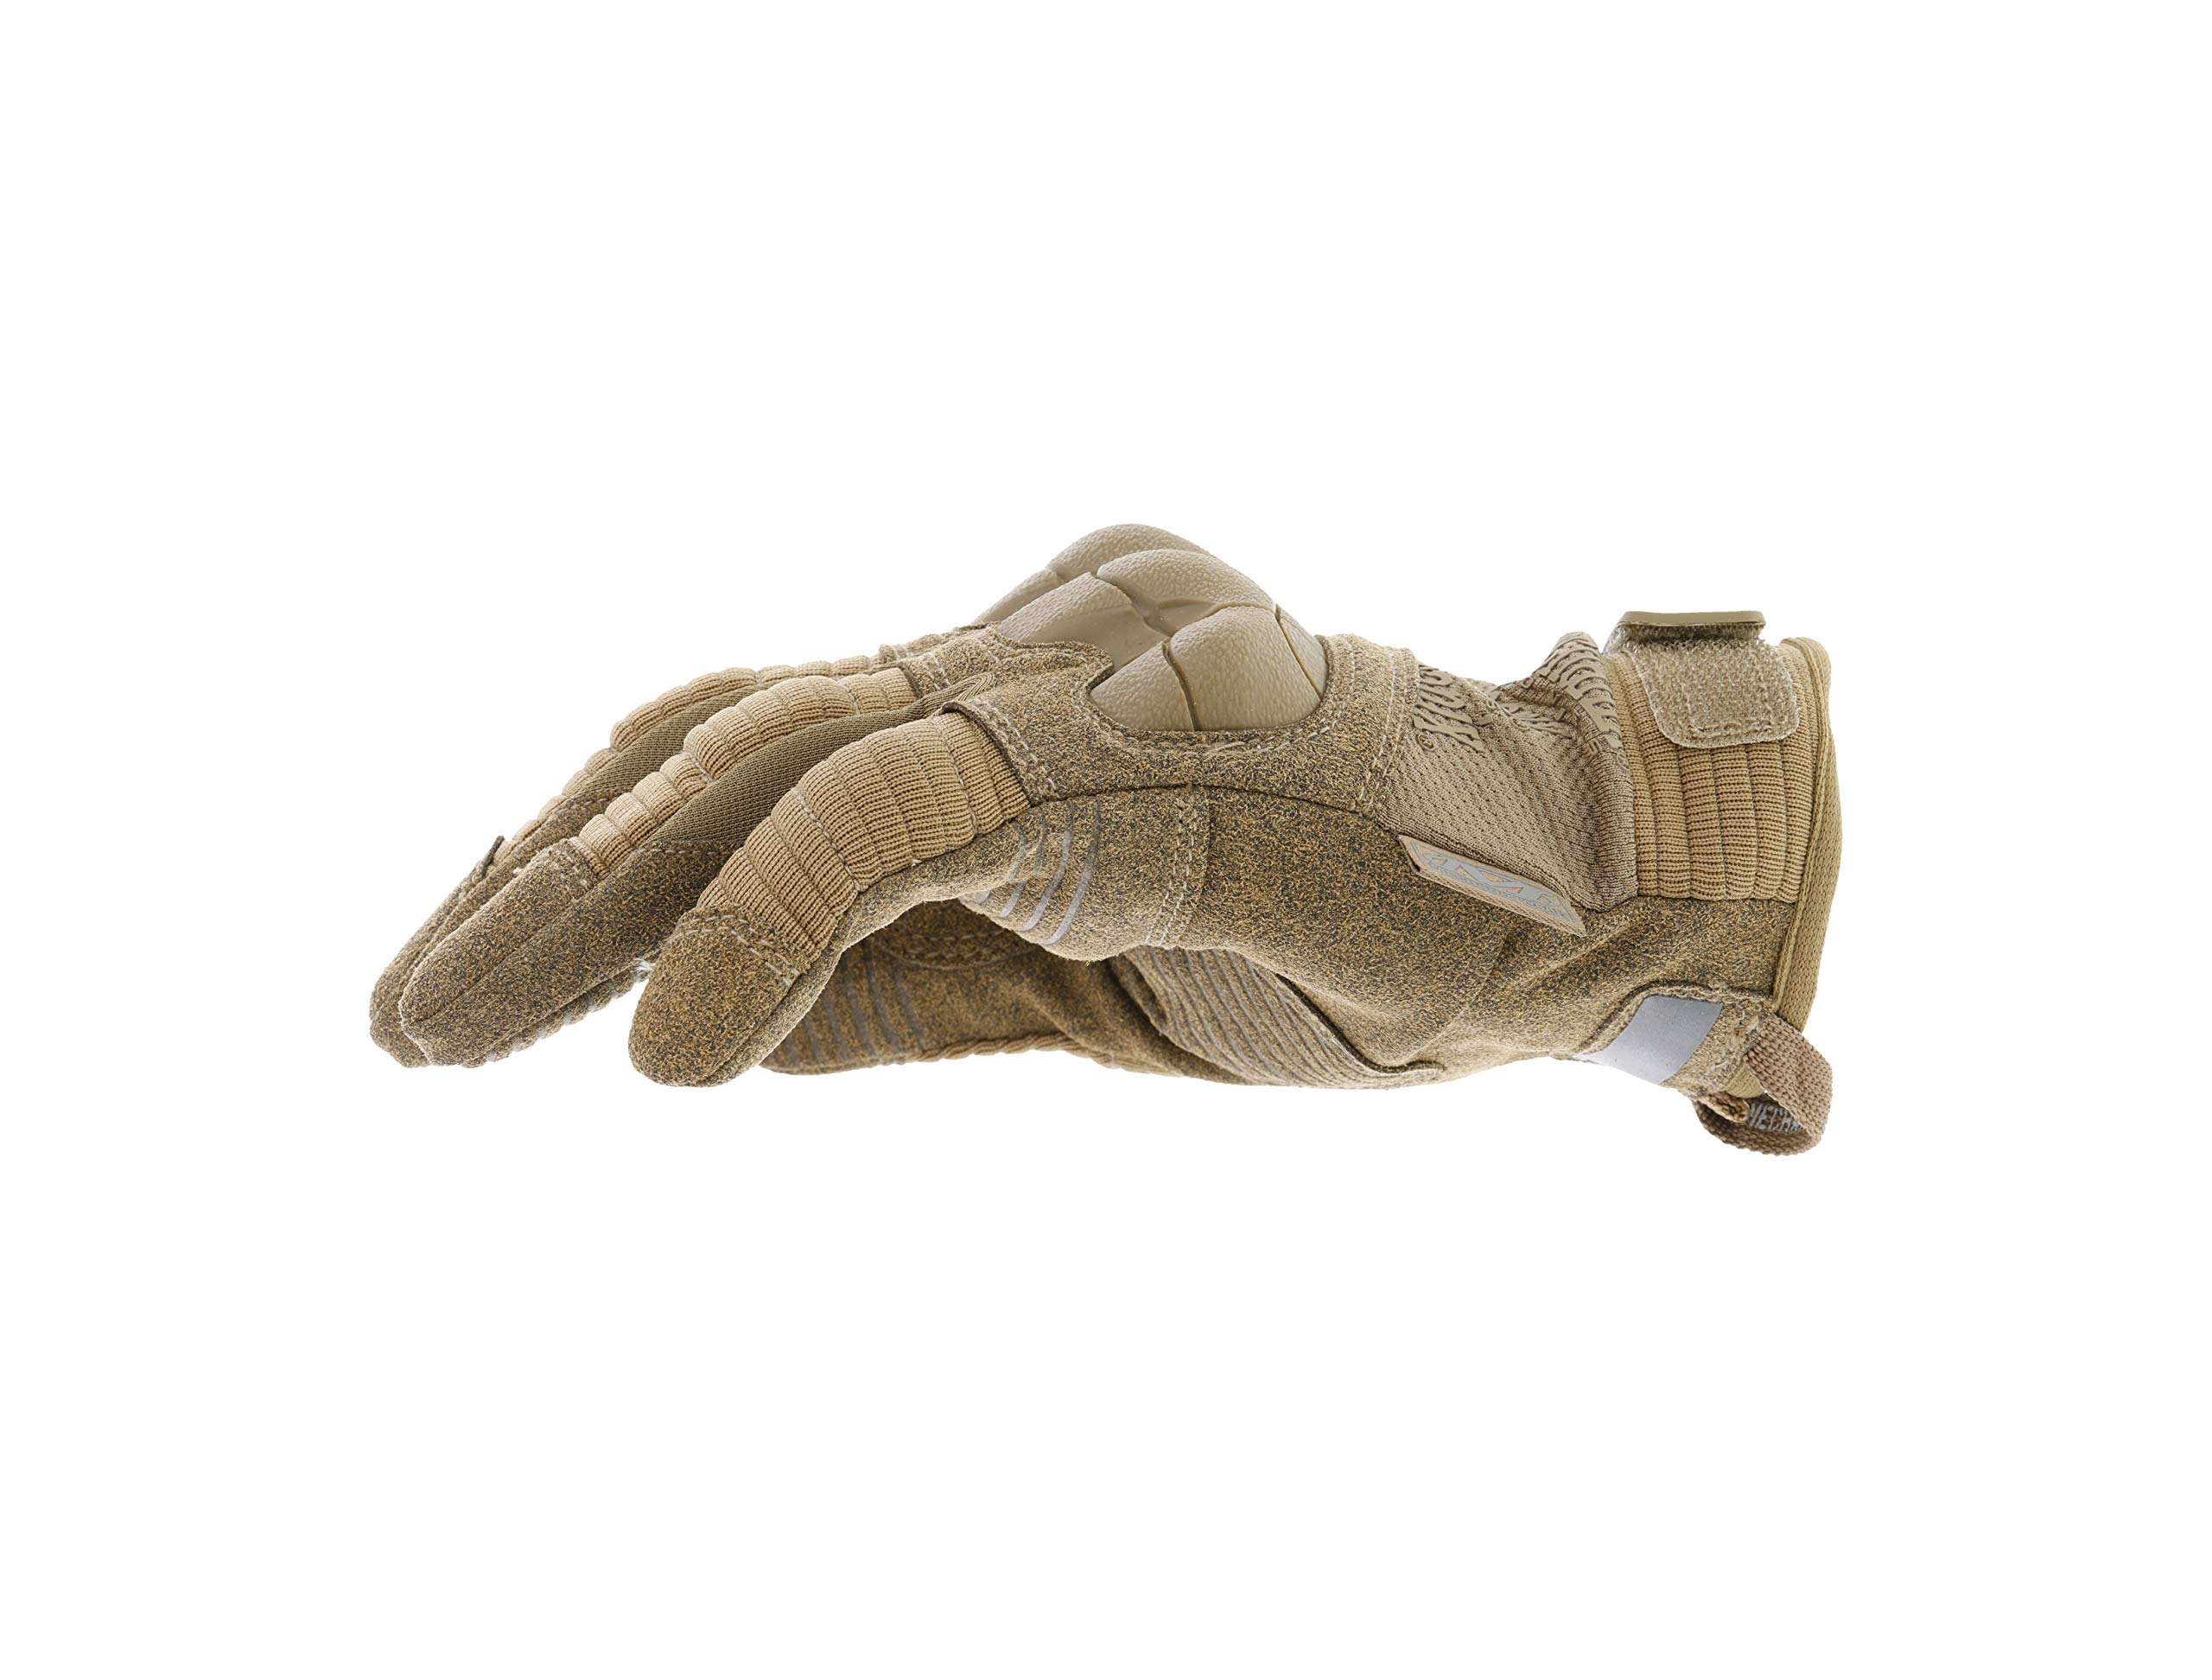 Mechanix Wear: M-Pact 3 Tactical Work Gloves, Touchscreen Capability, Synthetic Leather Gloves, Finger Reinforcement and Impact Protection, Work Gloves for Men (Coyote Brown, Small)